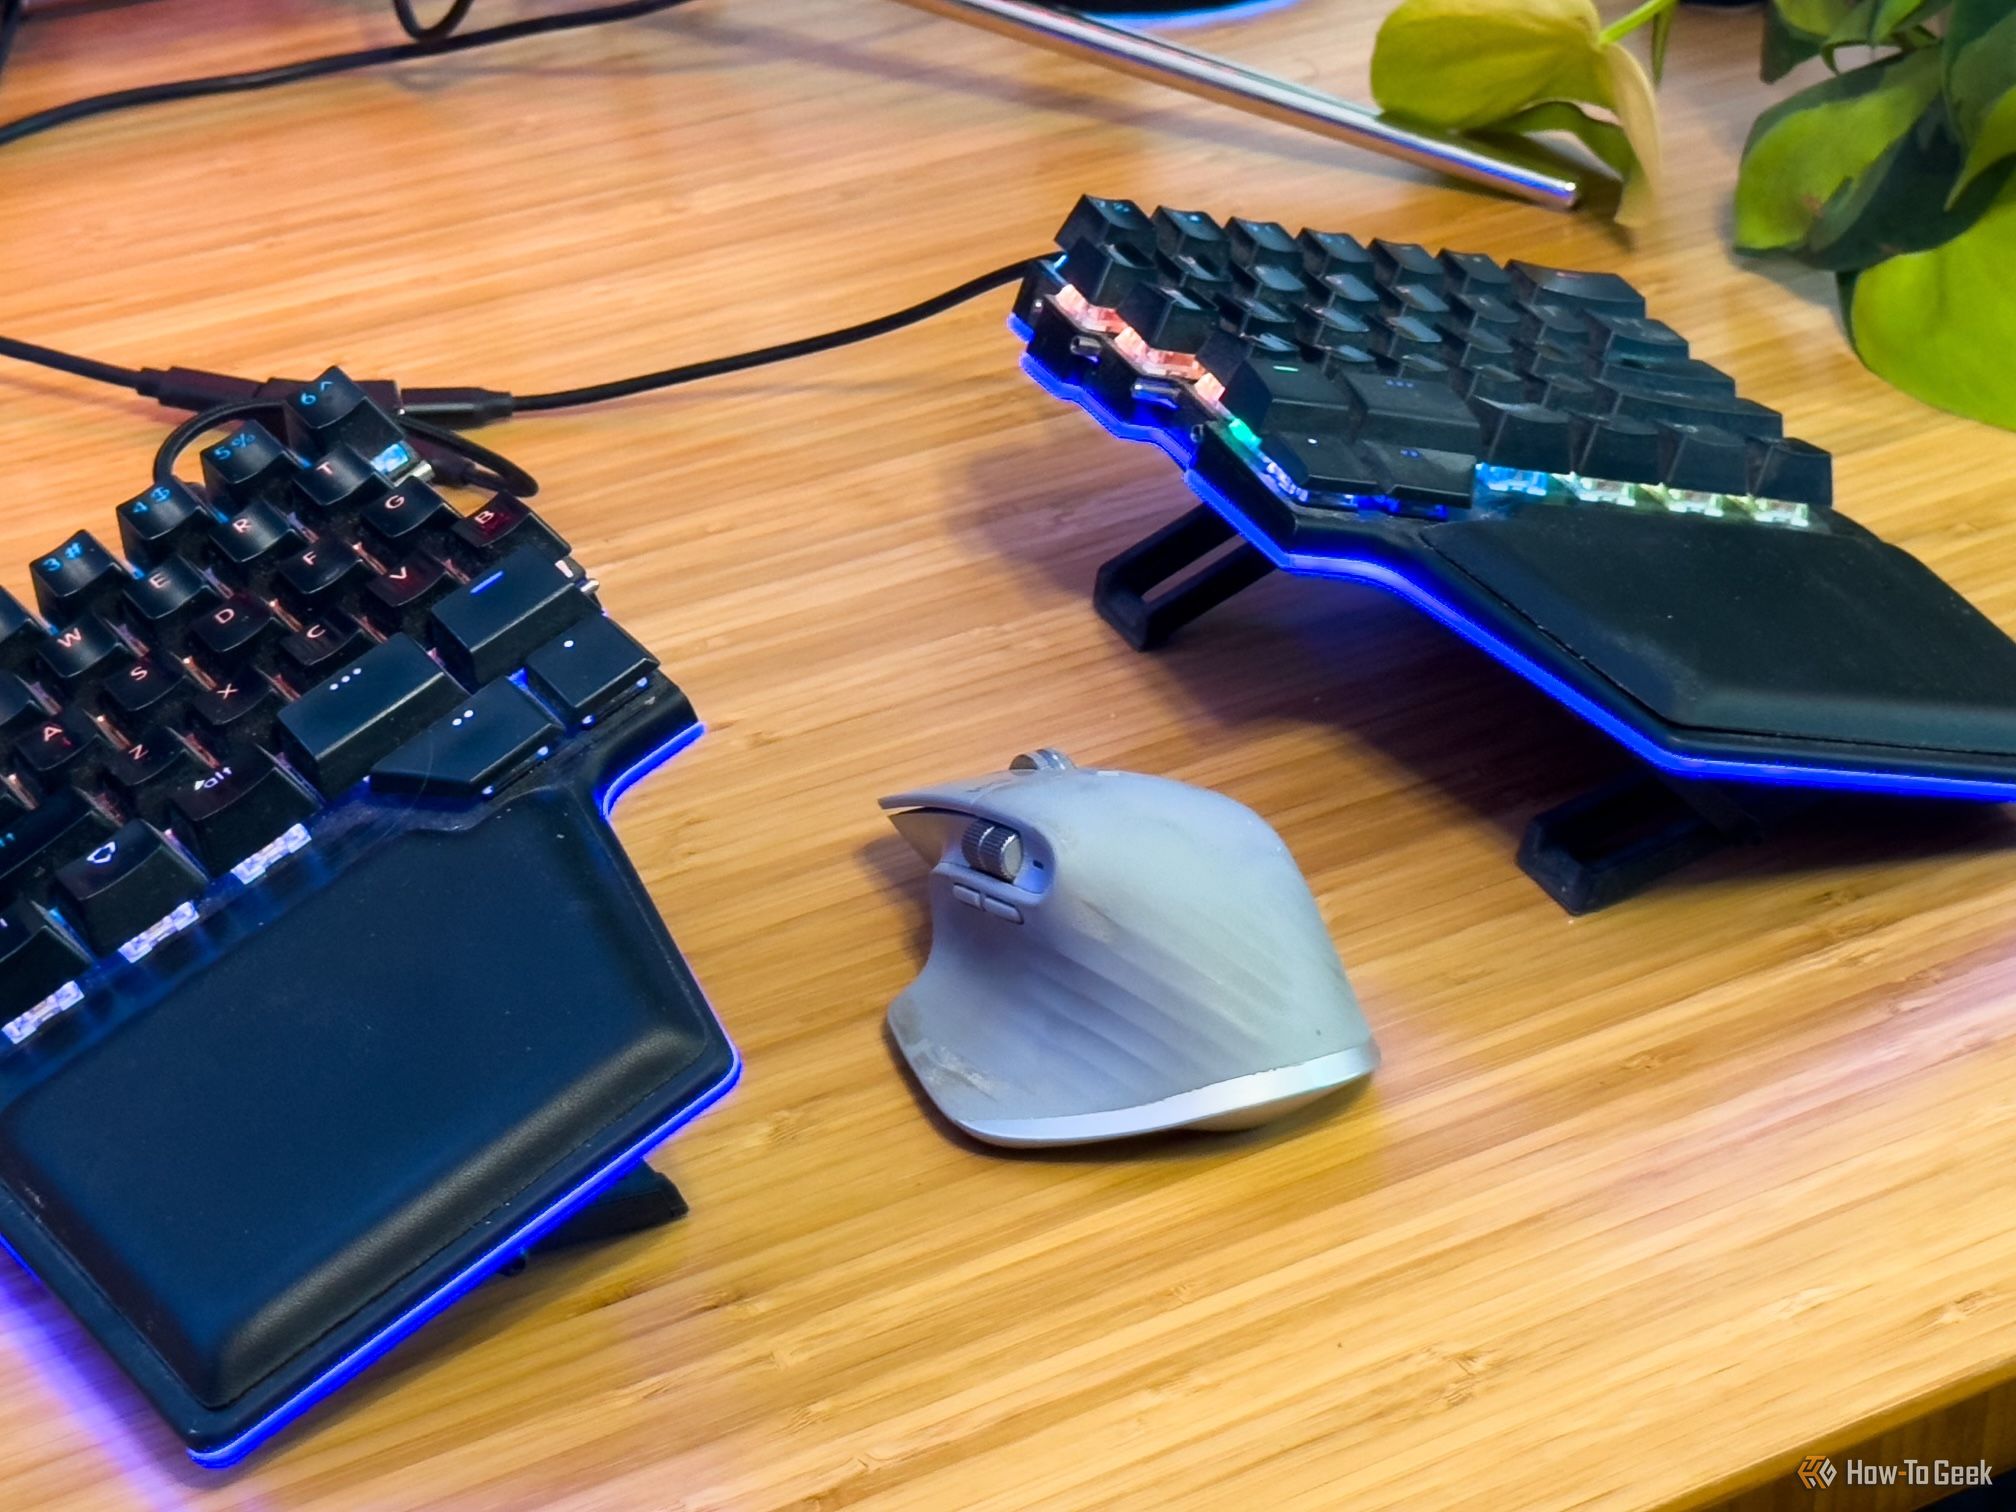 Mouse In The Middle of a Split Keyboard